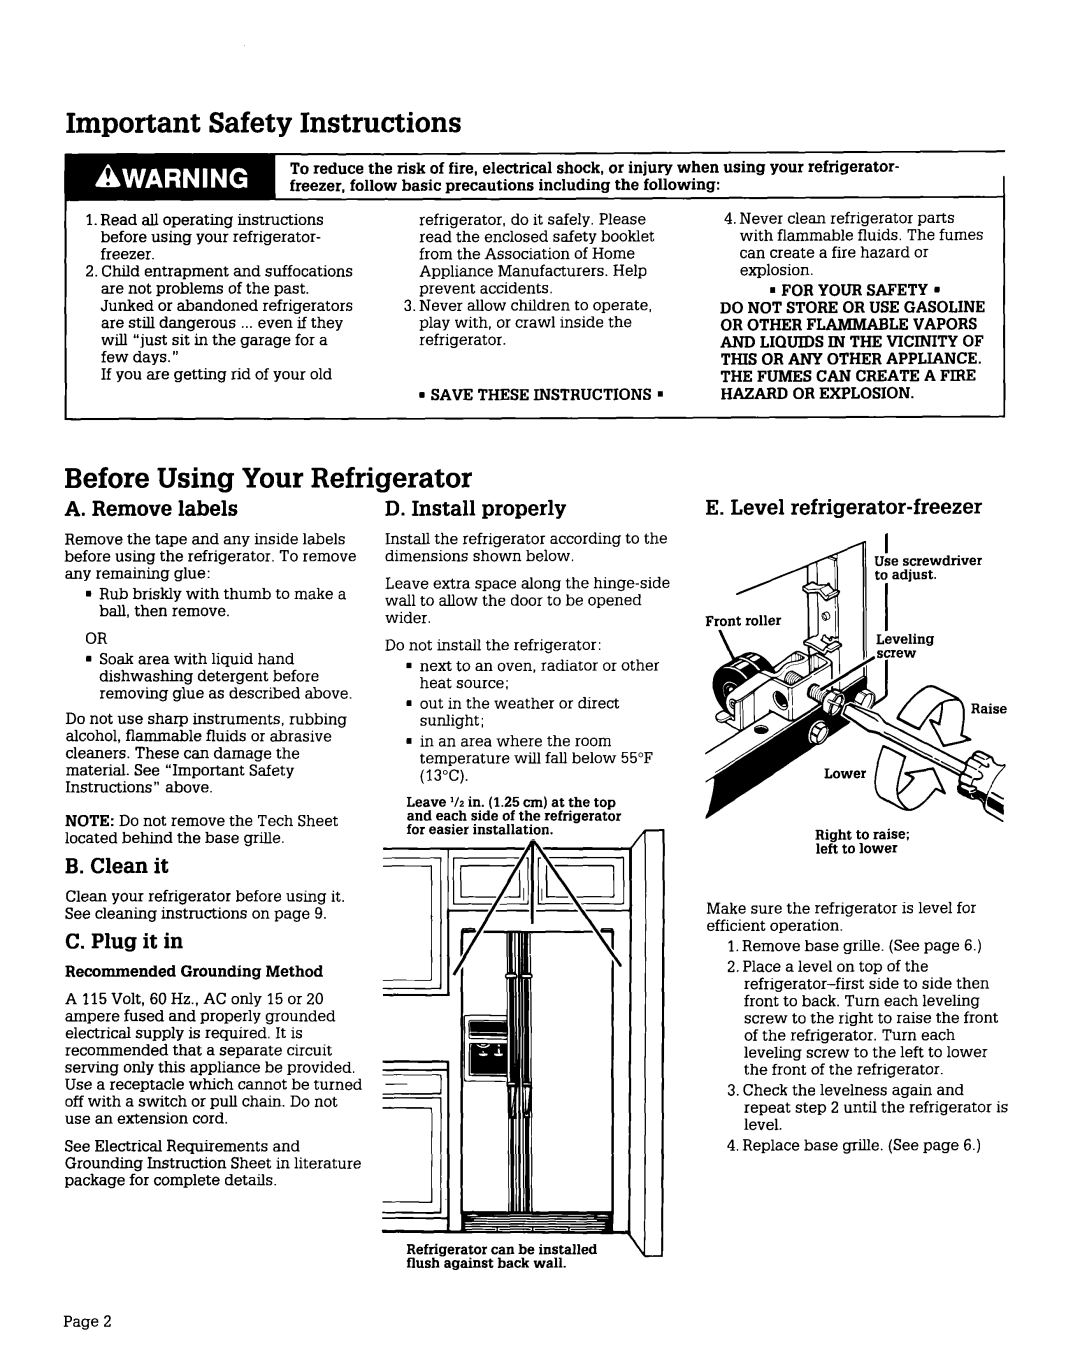 Whirlpool RS22AR Important Safety Instructions, Before Using Your Refrigerator, A. Remove labels, D. Install properly 